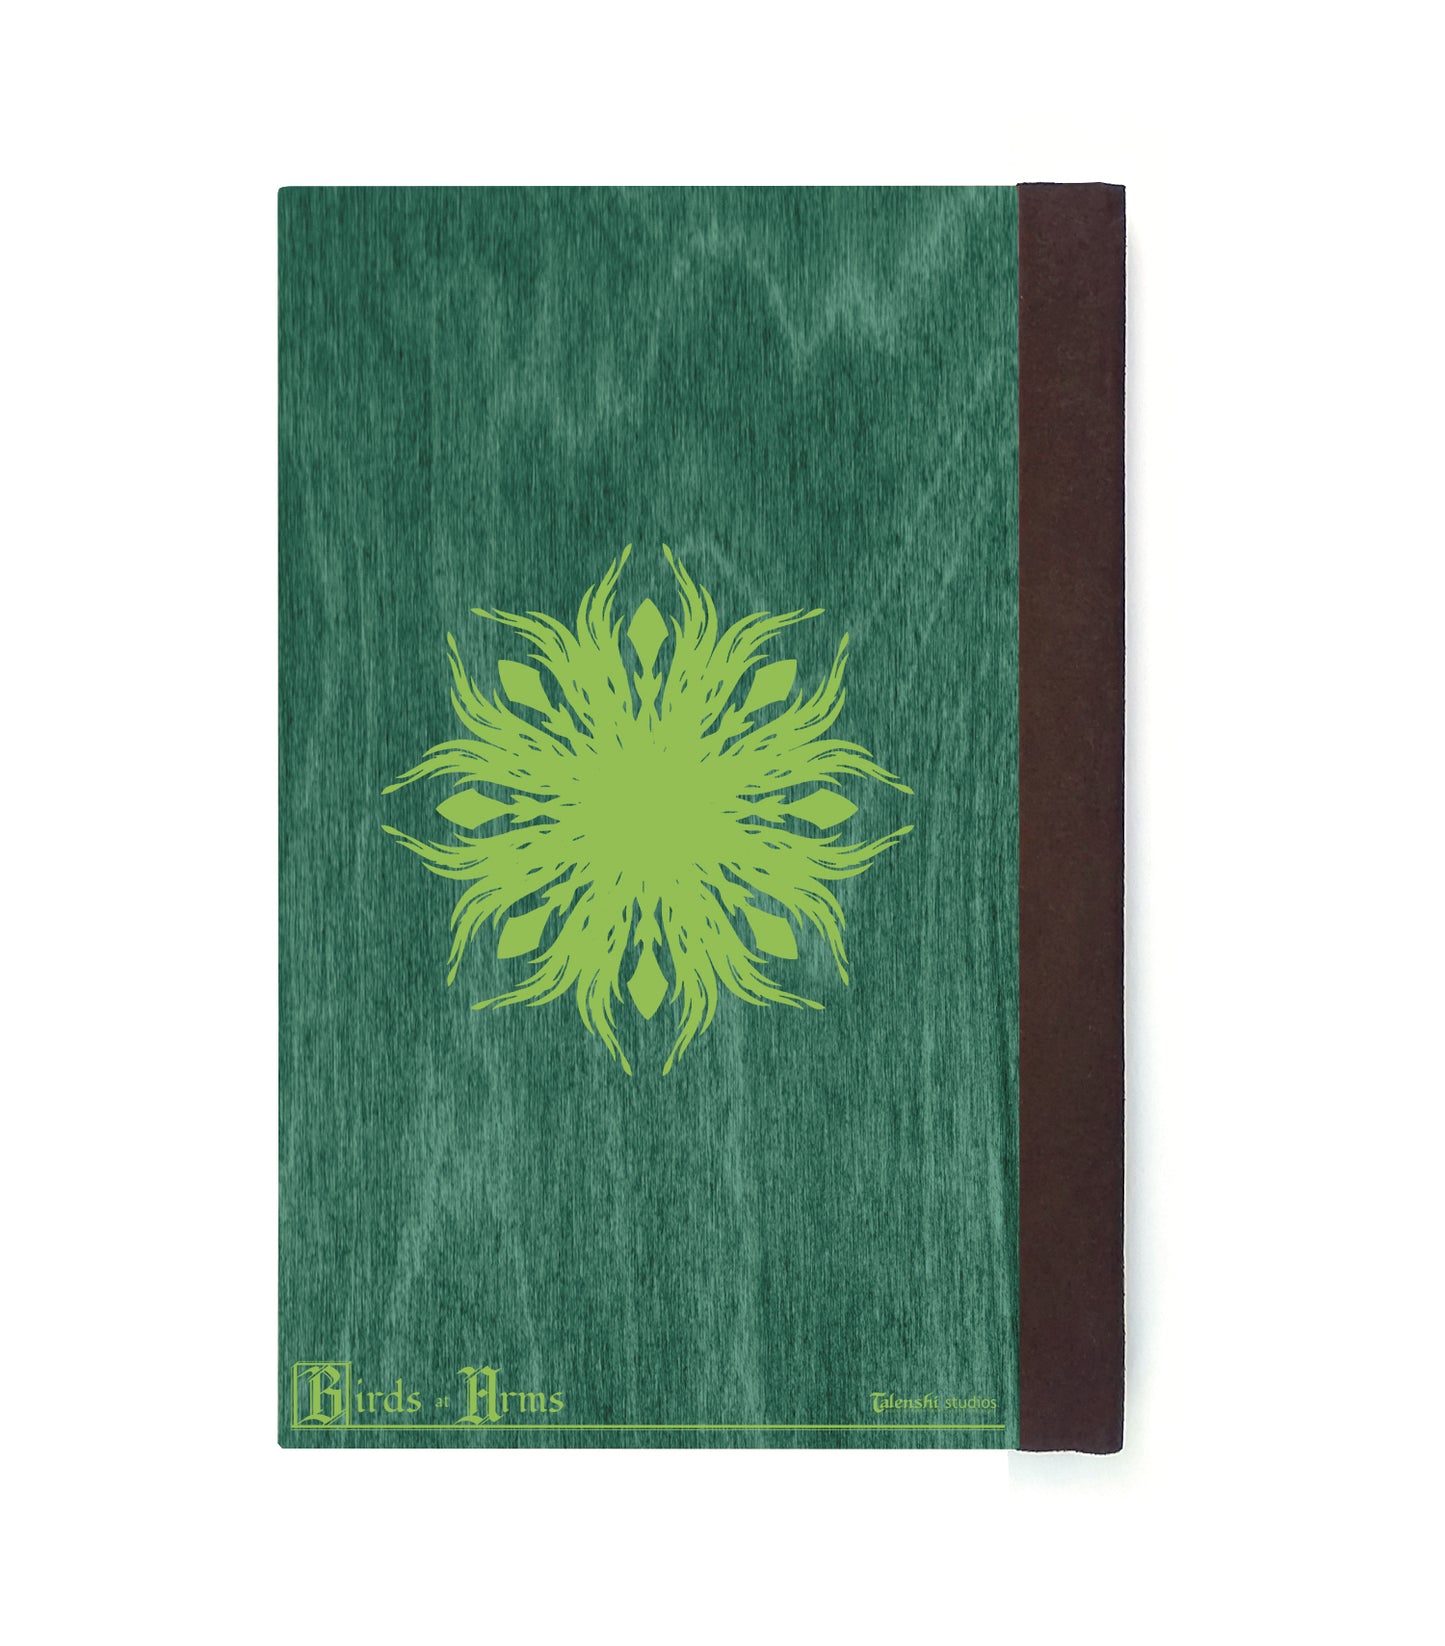 Mage Priest Magpie Magnetic Wooden Journal, Green & Lime